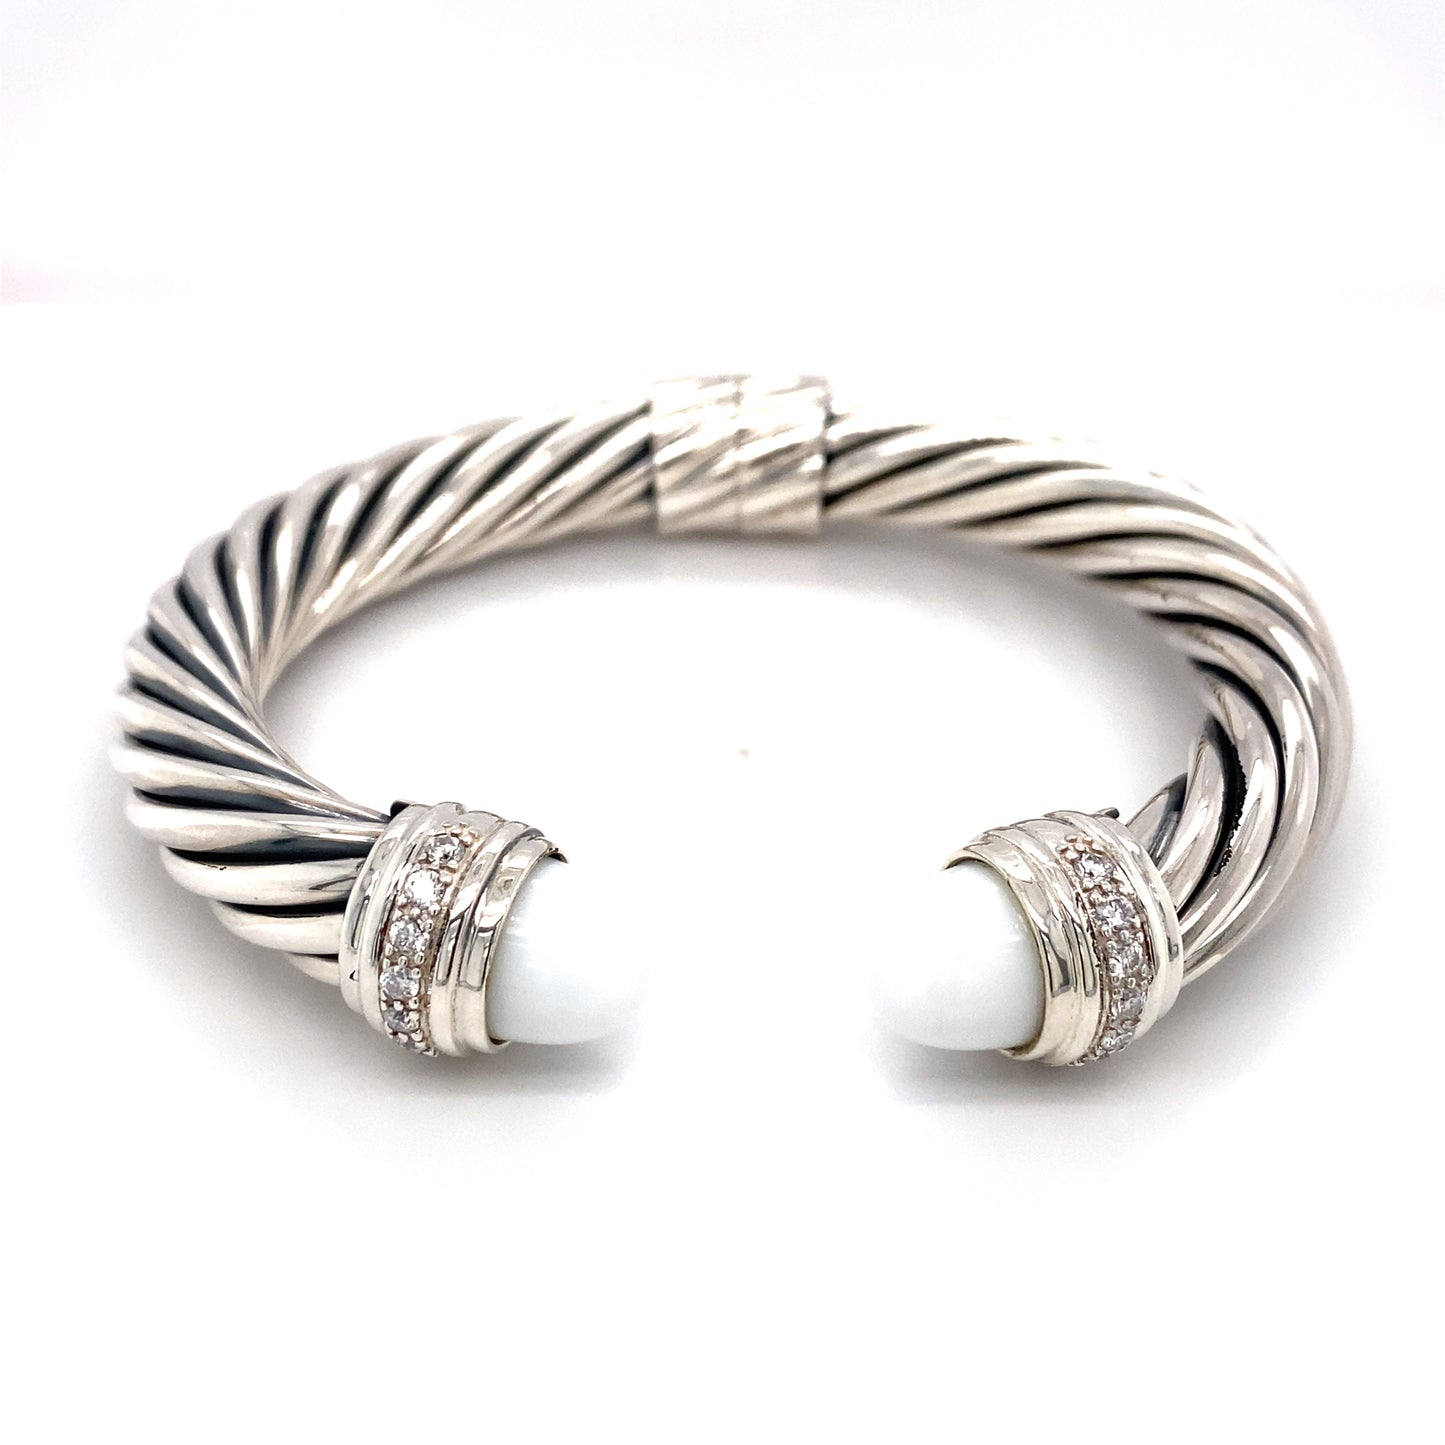 David Yurman Chalcedony and White Sapphire Hinged Cuff in Sterling Silver